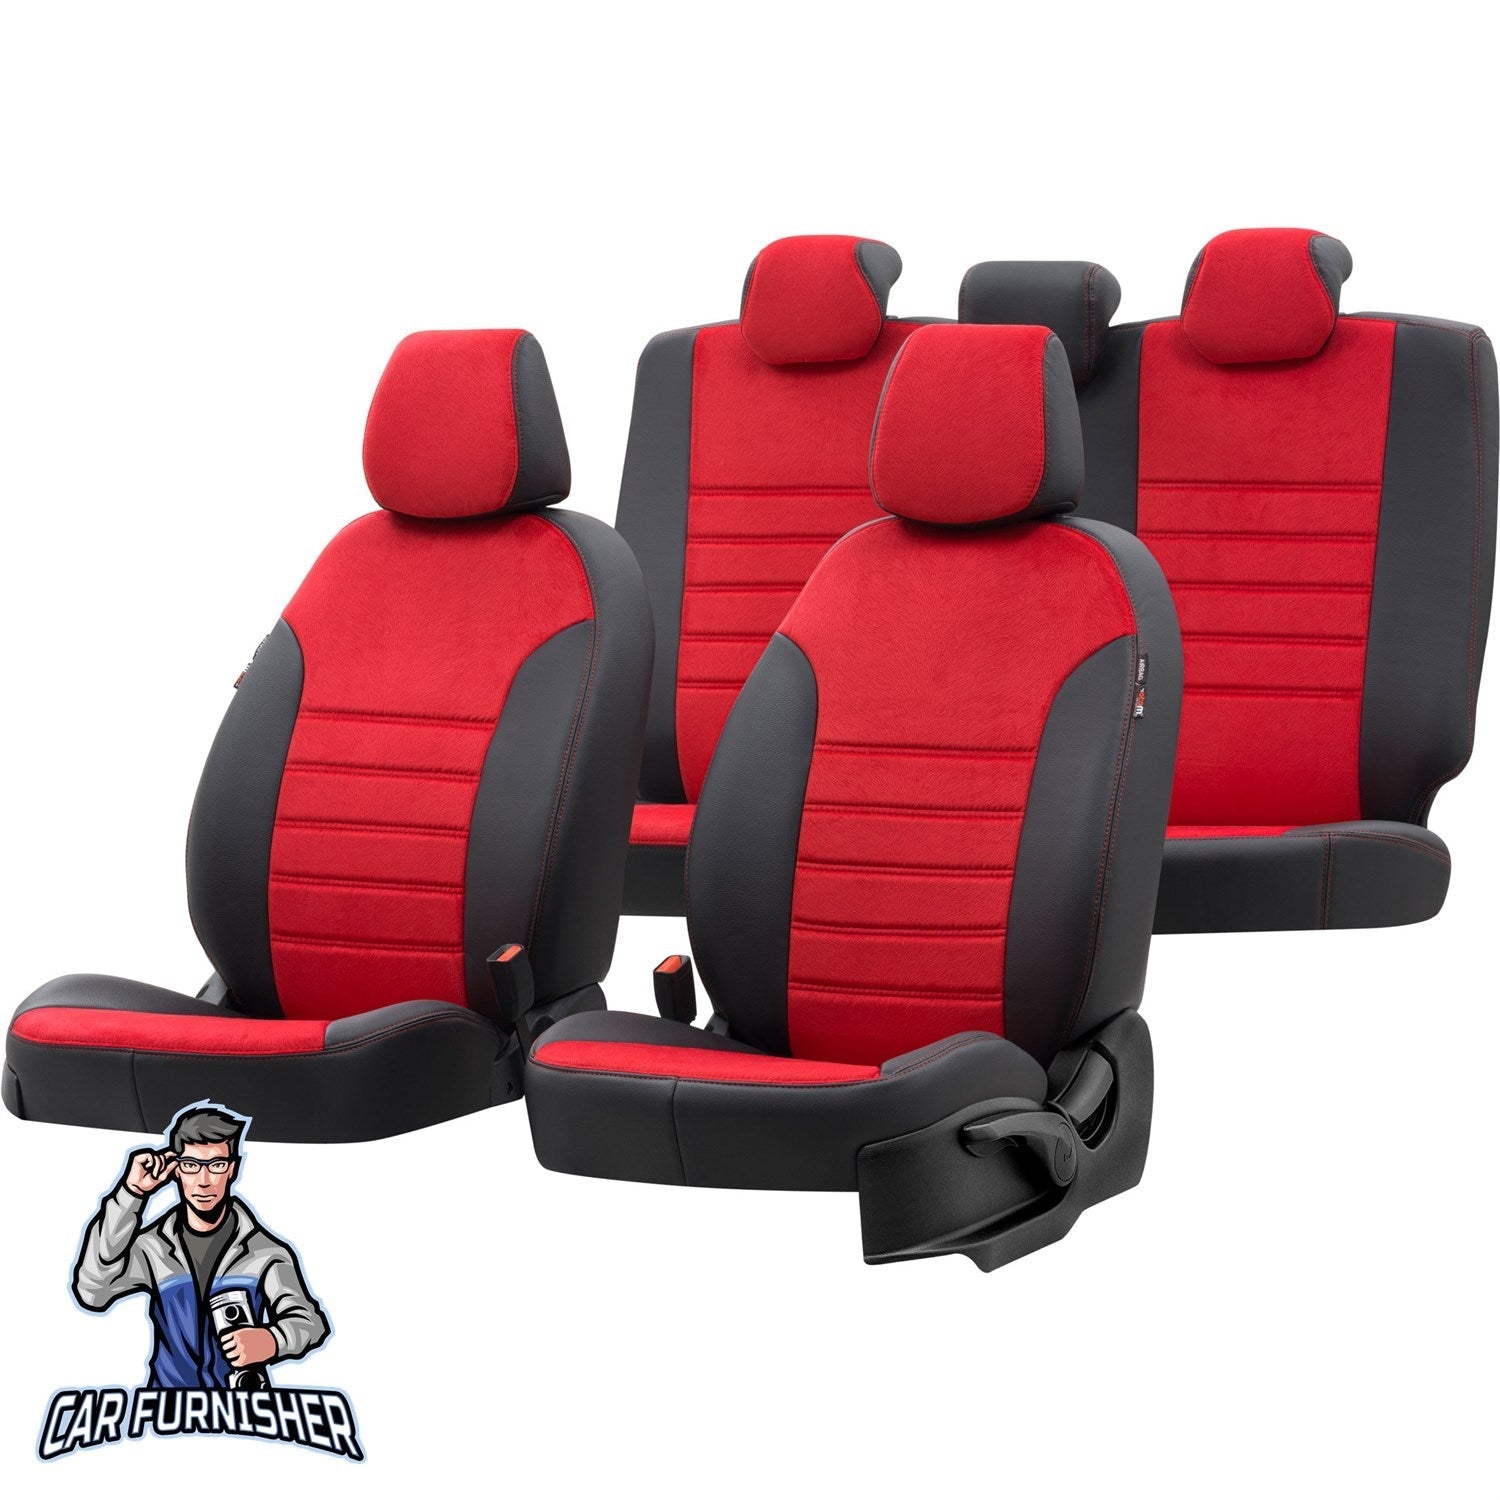 Chevrolet Aveo Car Seat Cover 2003-2023 T200/T250/T300 London Red Full Set (5 Seats + Handrest) Leather & Fabric